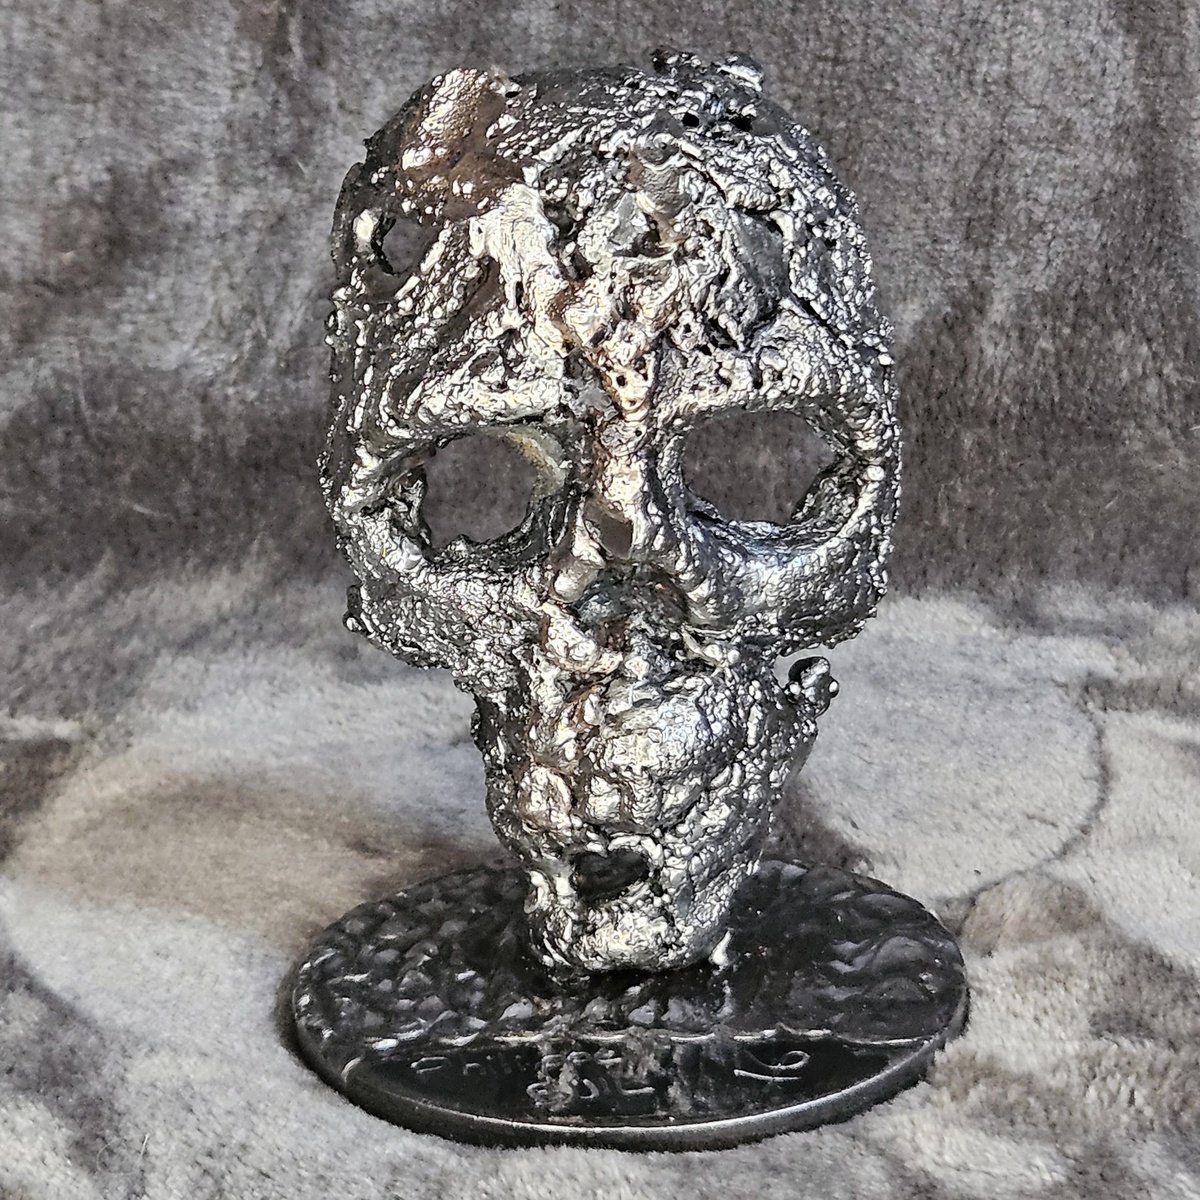 Skull 82-23 by Philippe Buil